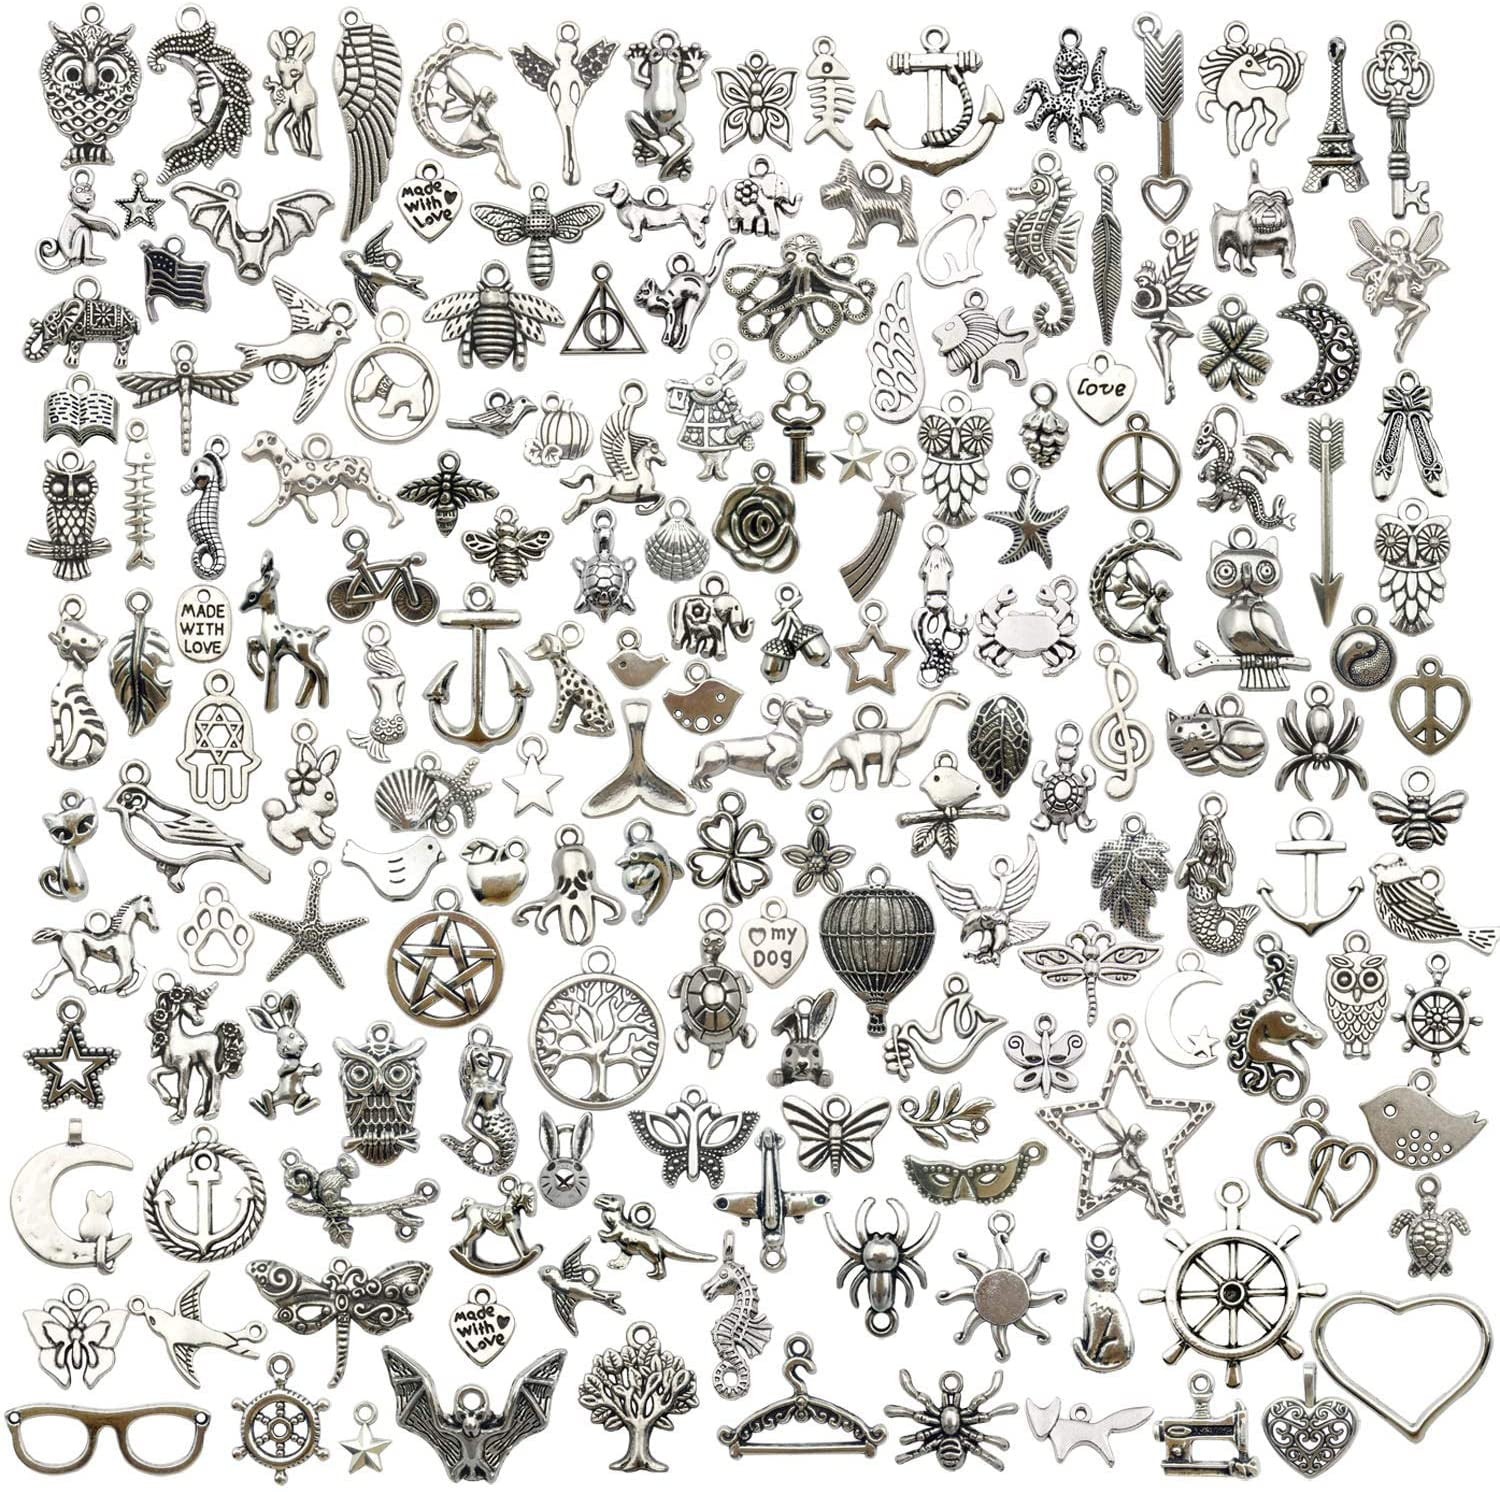 Wholesale 100/200Pcs Mixed Silver Charms Pendants For DIY Jewelry Making Craft 